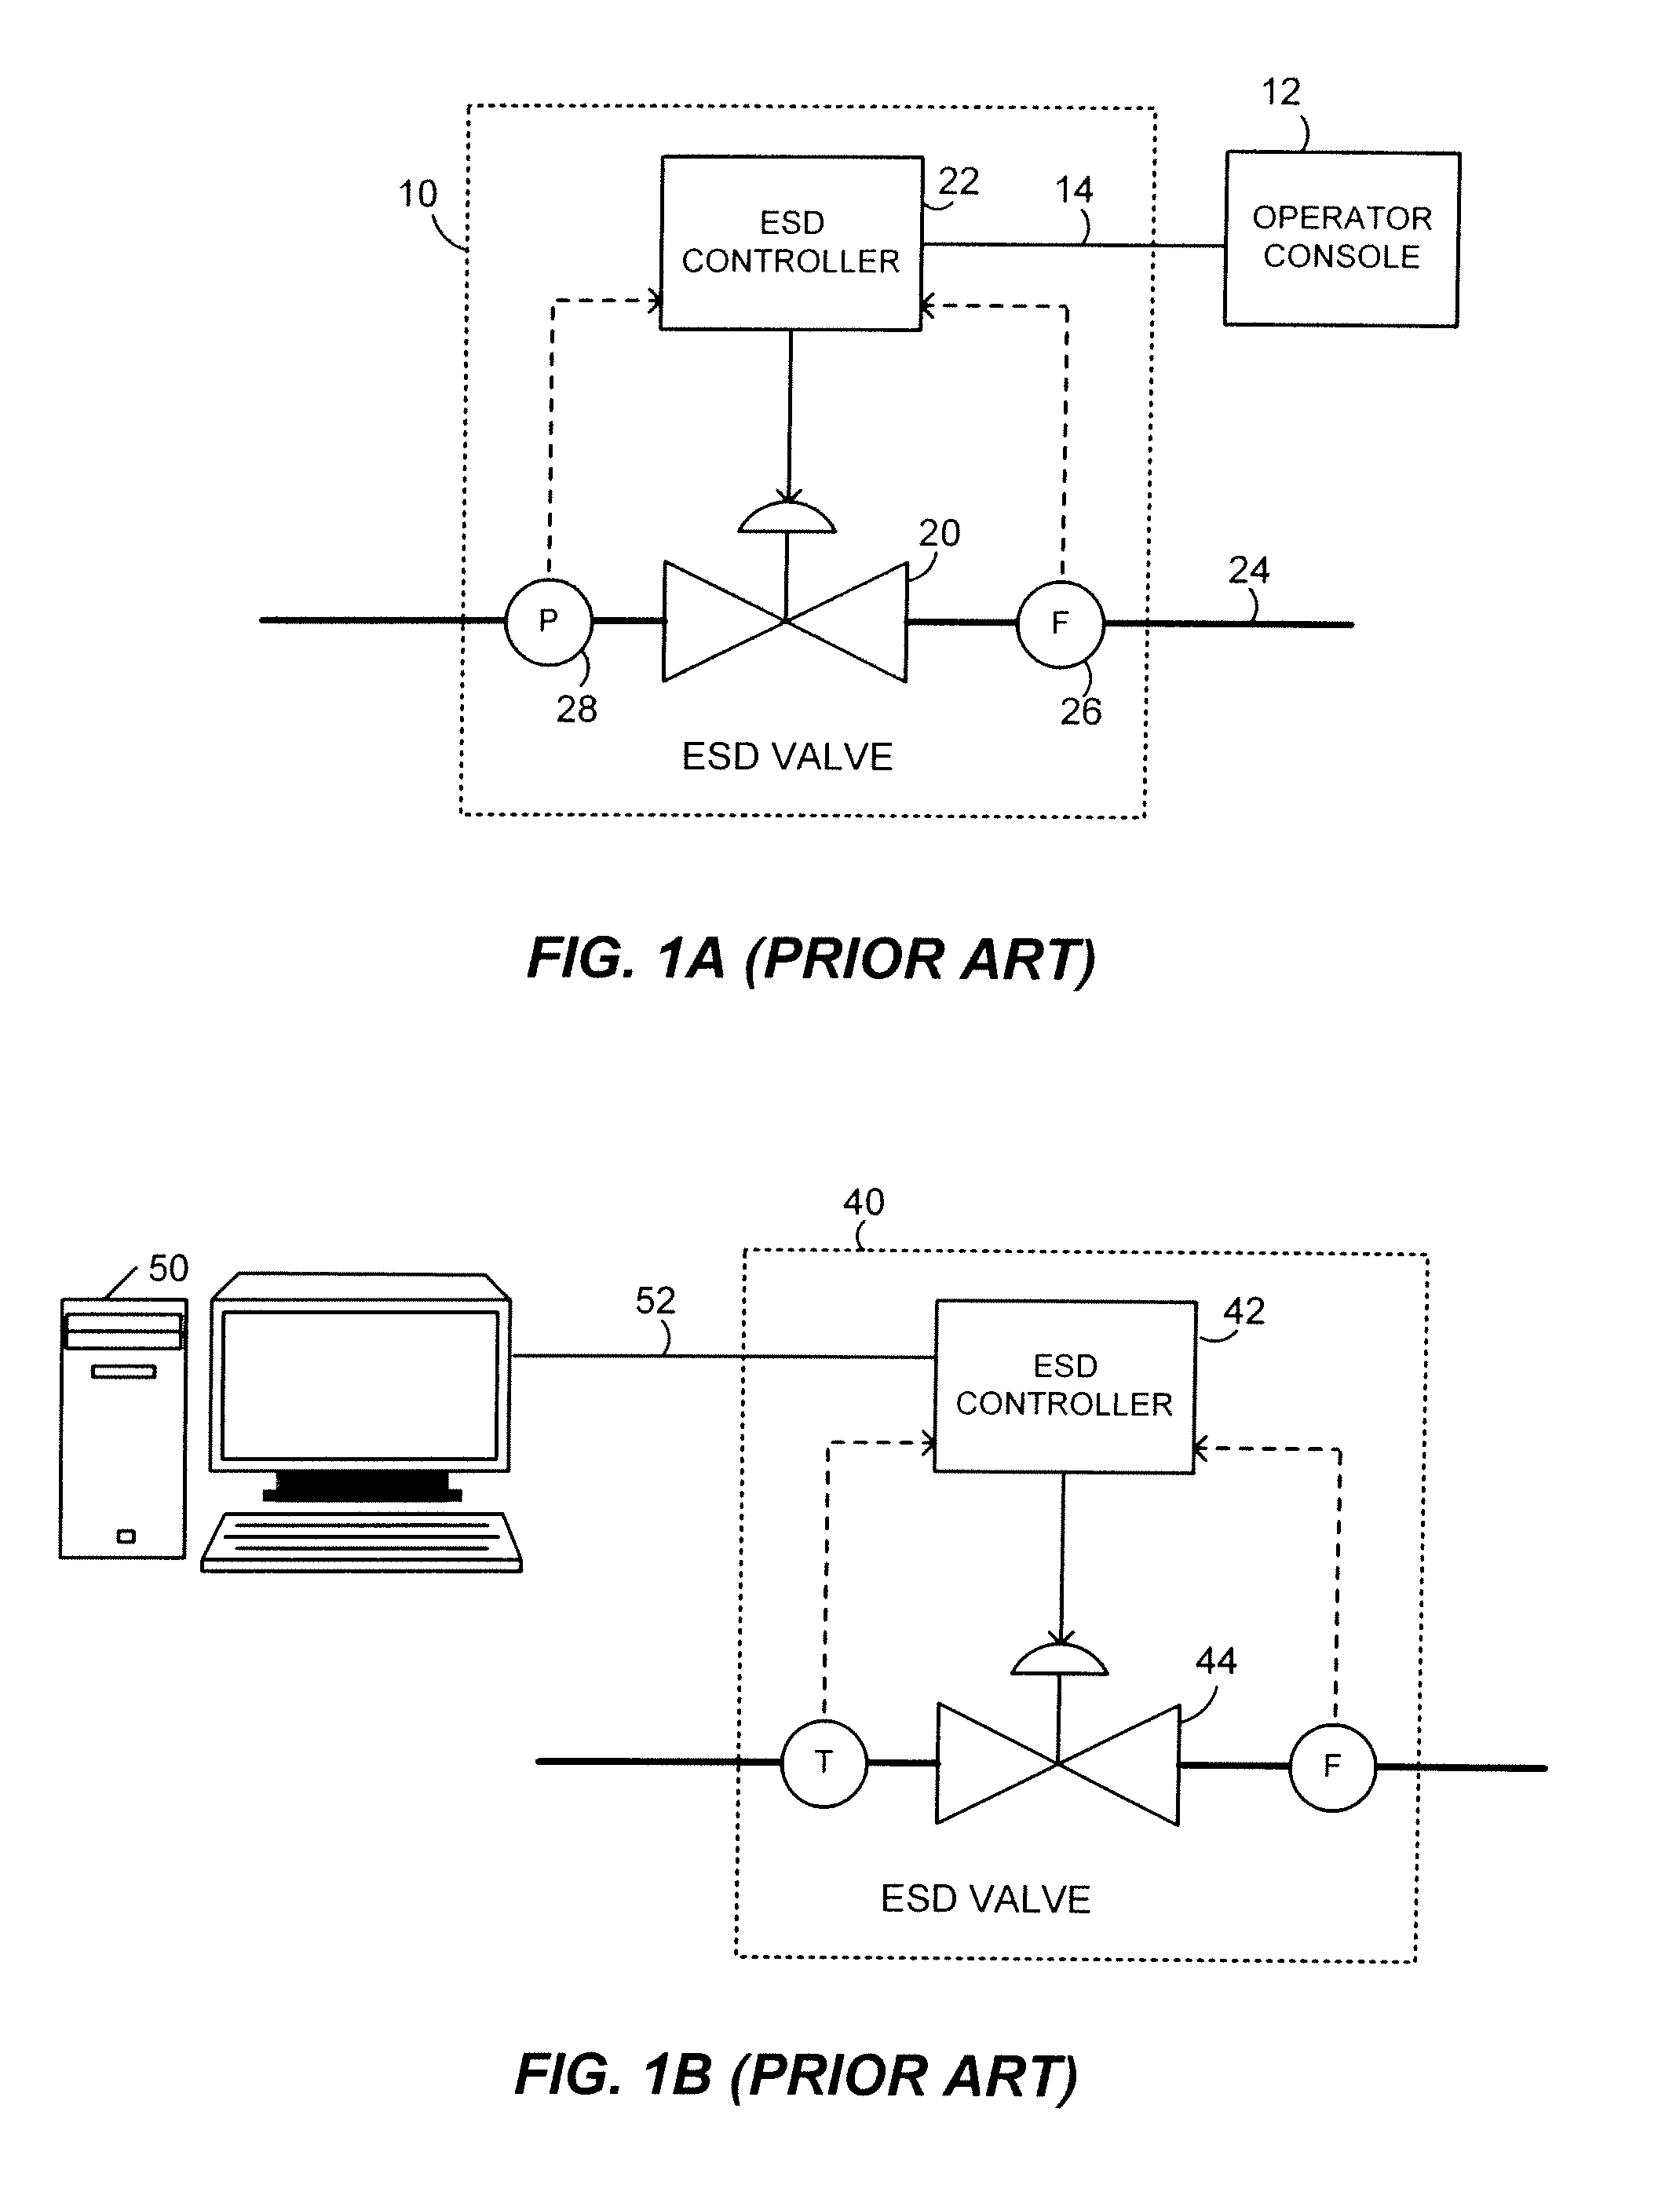 Method and apparatus for partial stroke testing of an emergency shutdown valve